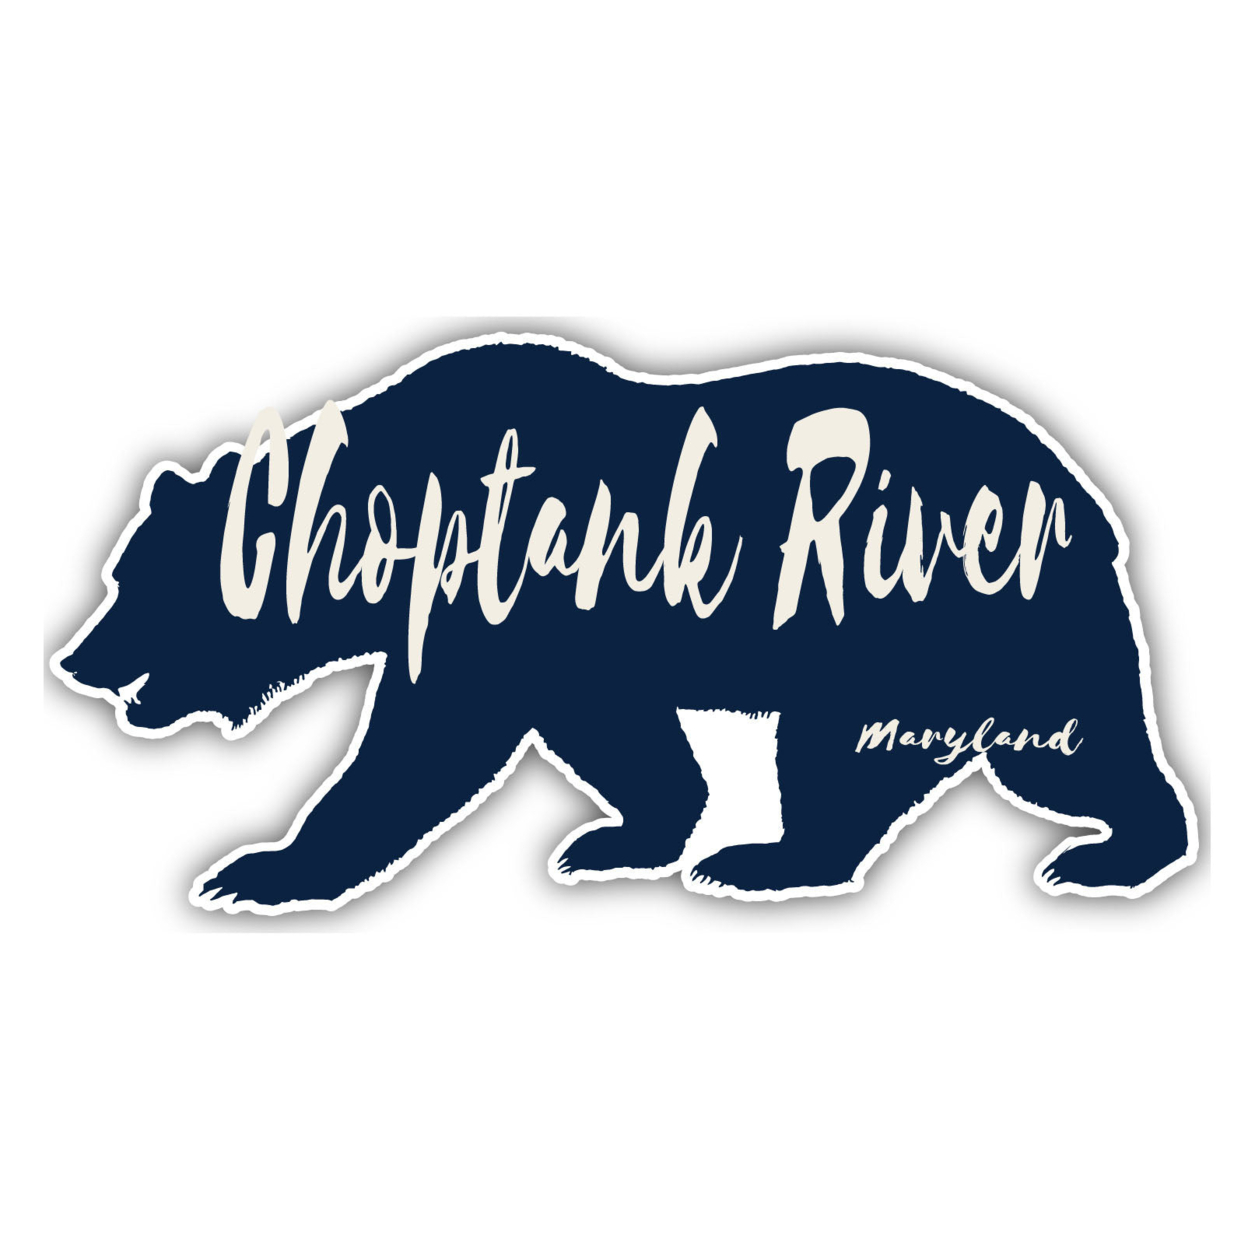 Choptank River Maryland Souvenir Decorative Stickers (Choose Theme And Size) - 4-Pack, 2-Inch, Bear